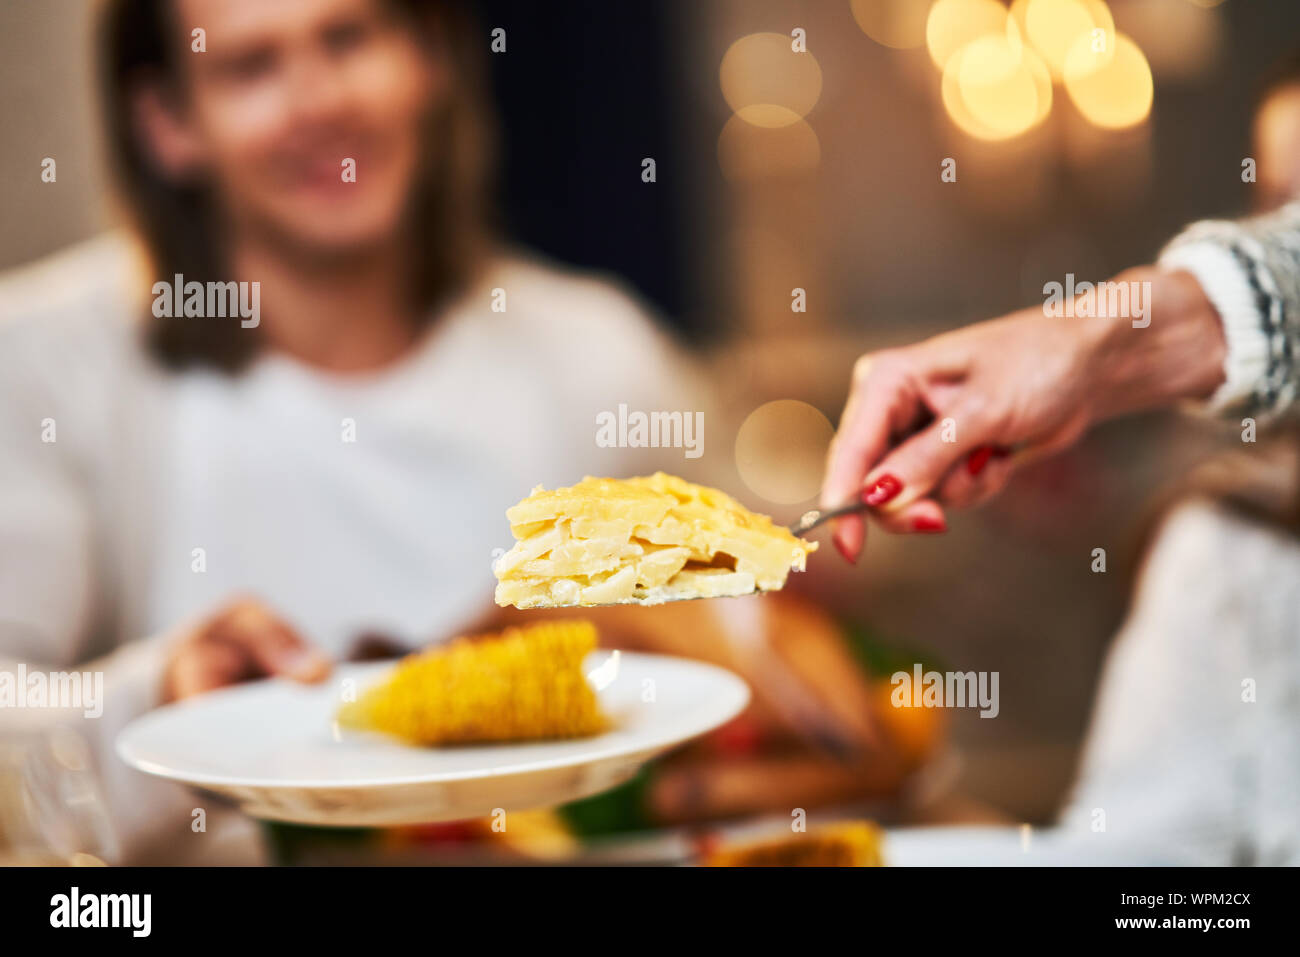 Family celebrating Thanksgiving. Focus on table and dishes Stock Photo